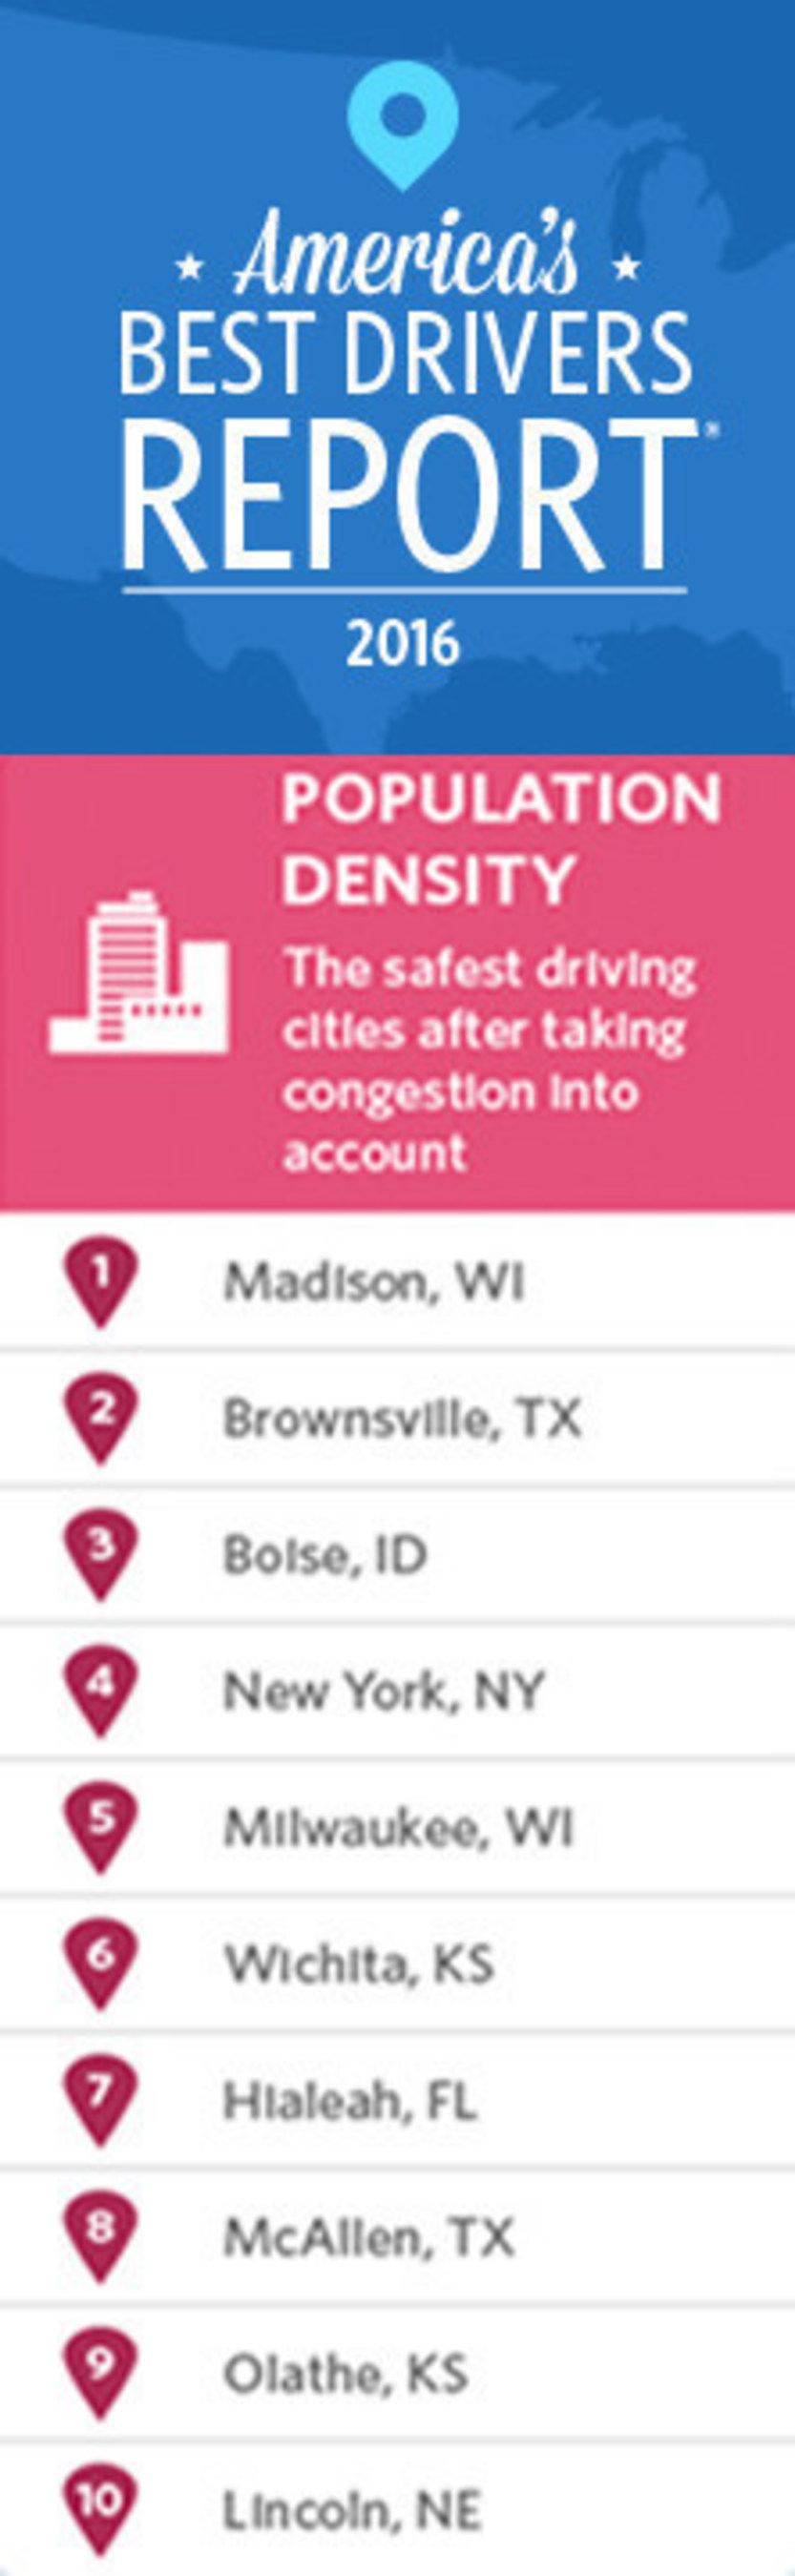 Allstate's 2016 America's Best Drivers Report shows which of the 200 largest U.S. cities have the safest drivers when factoring auto property damage claims with population density.